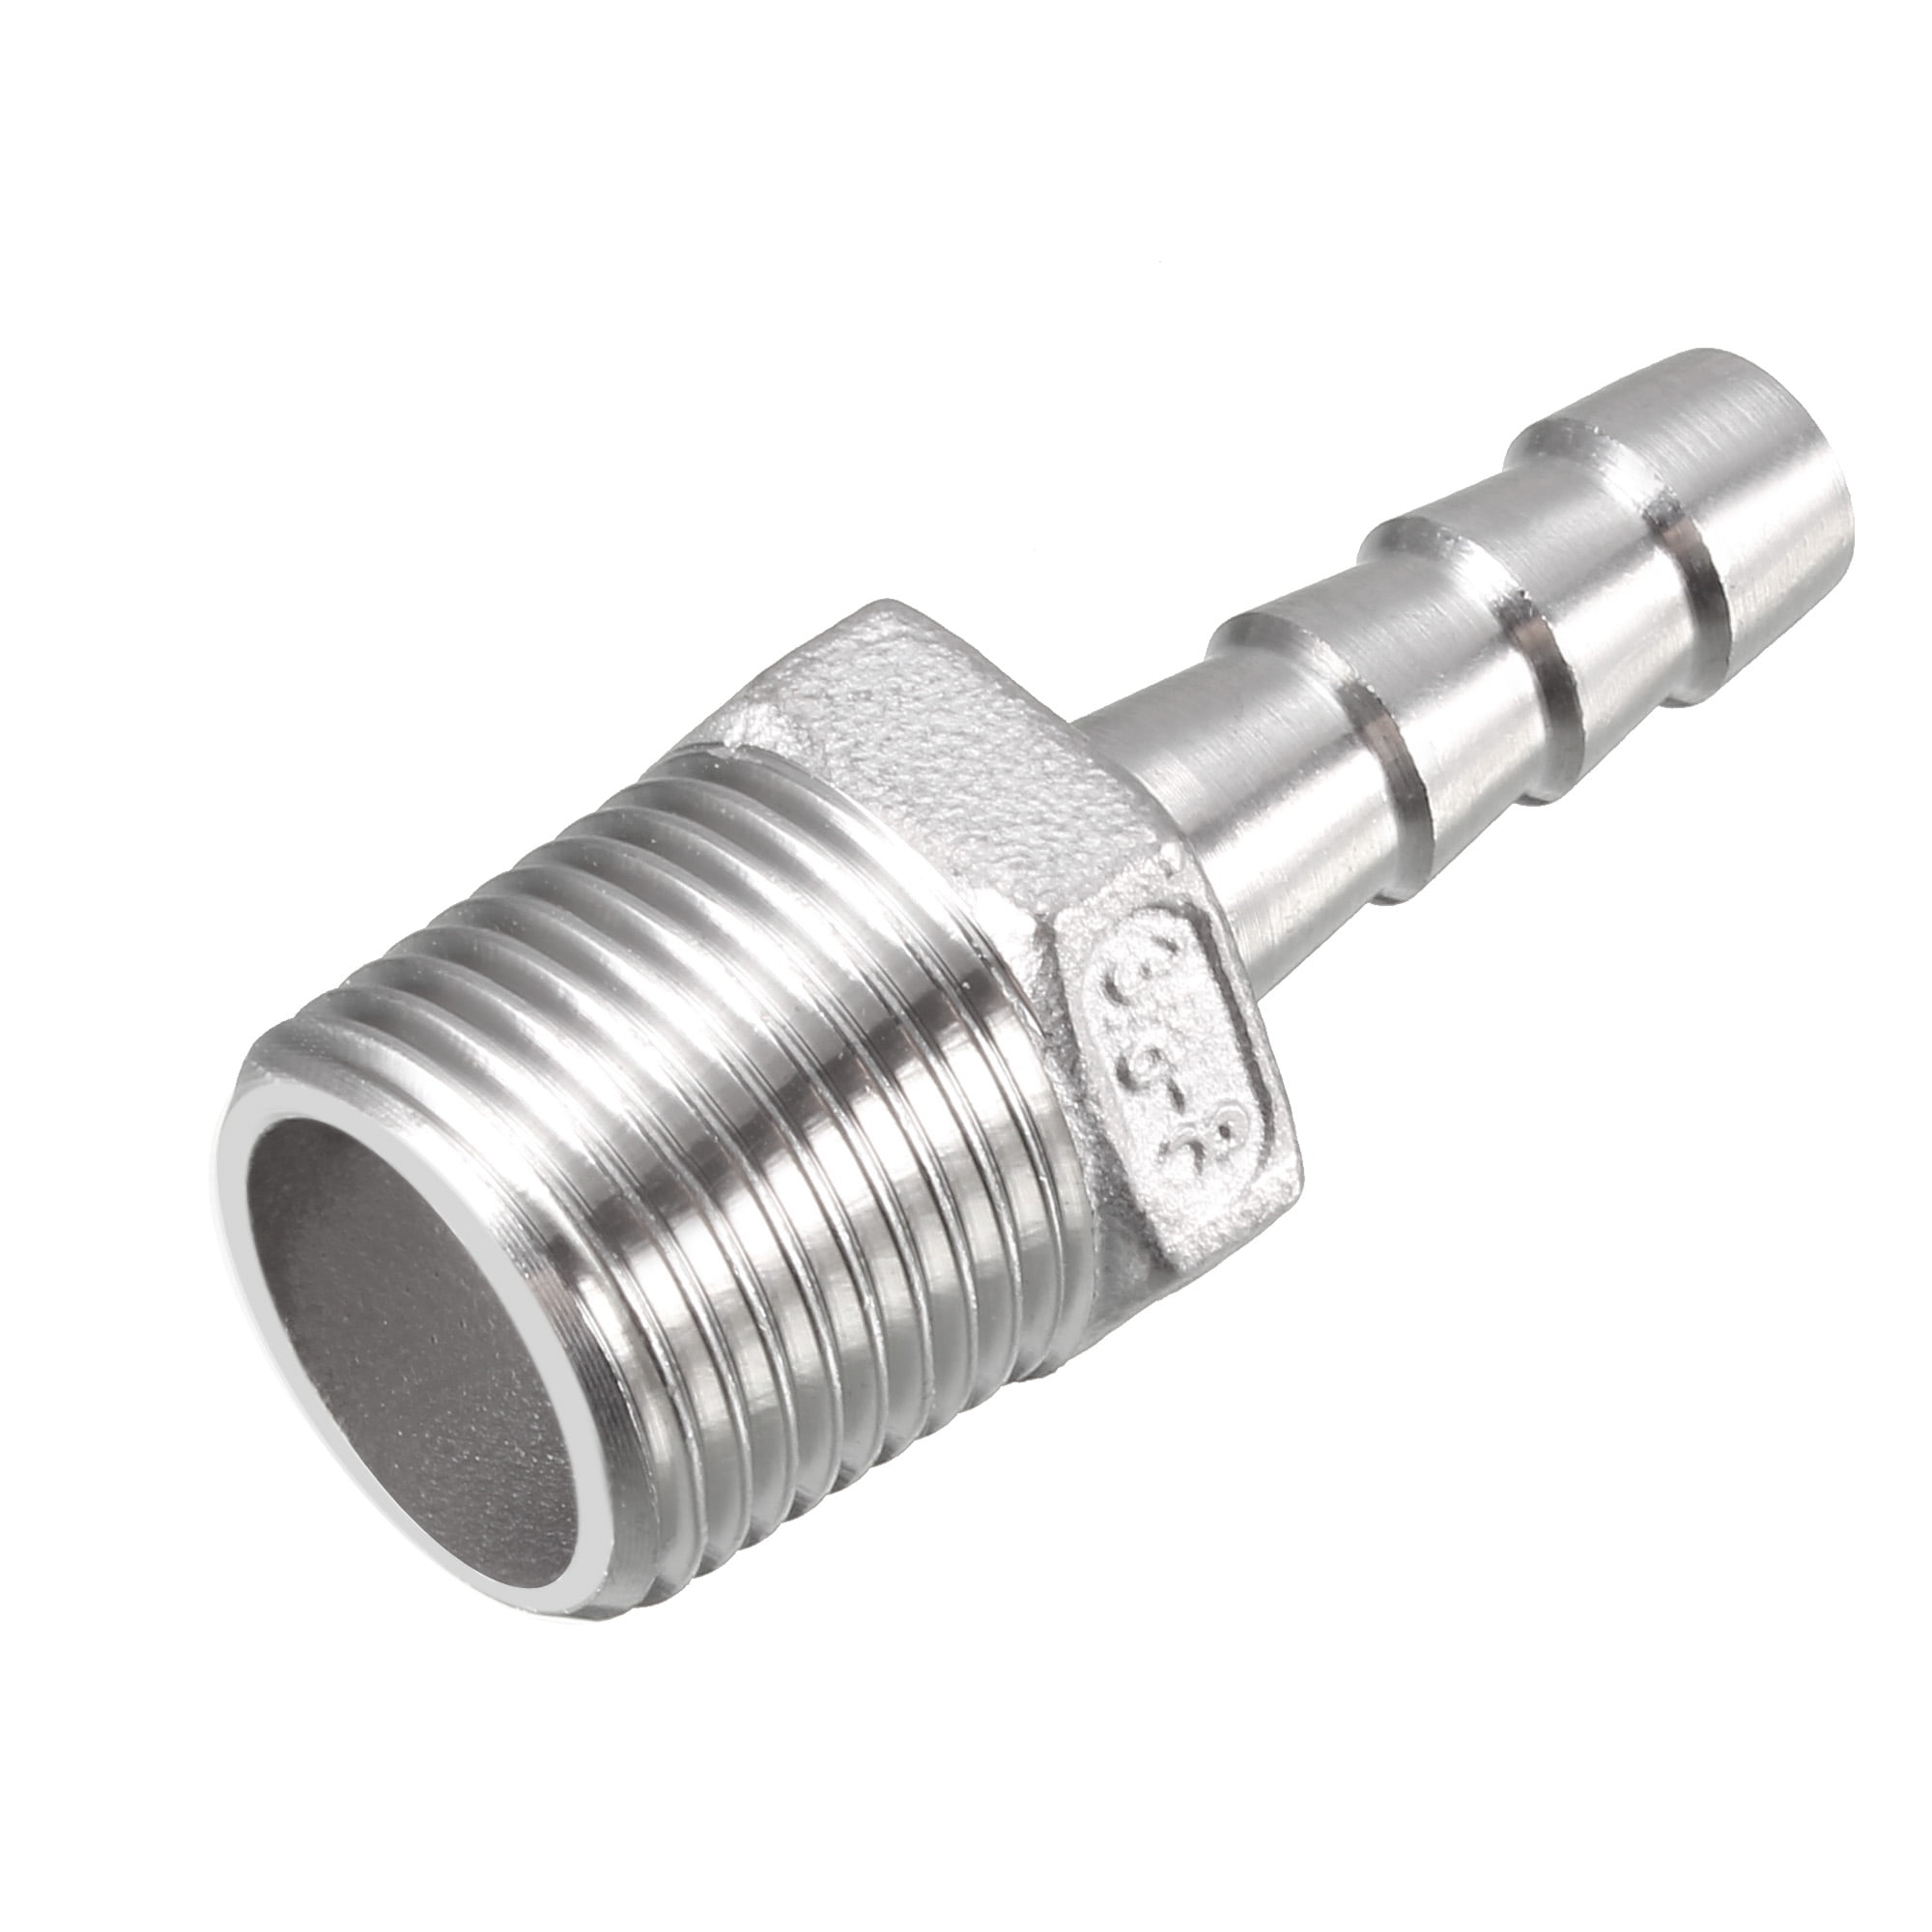 Stainless Steel Barb Hose Fitting Connector 8mm Barbed x G3/8 Male Pipe